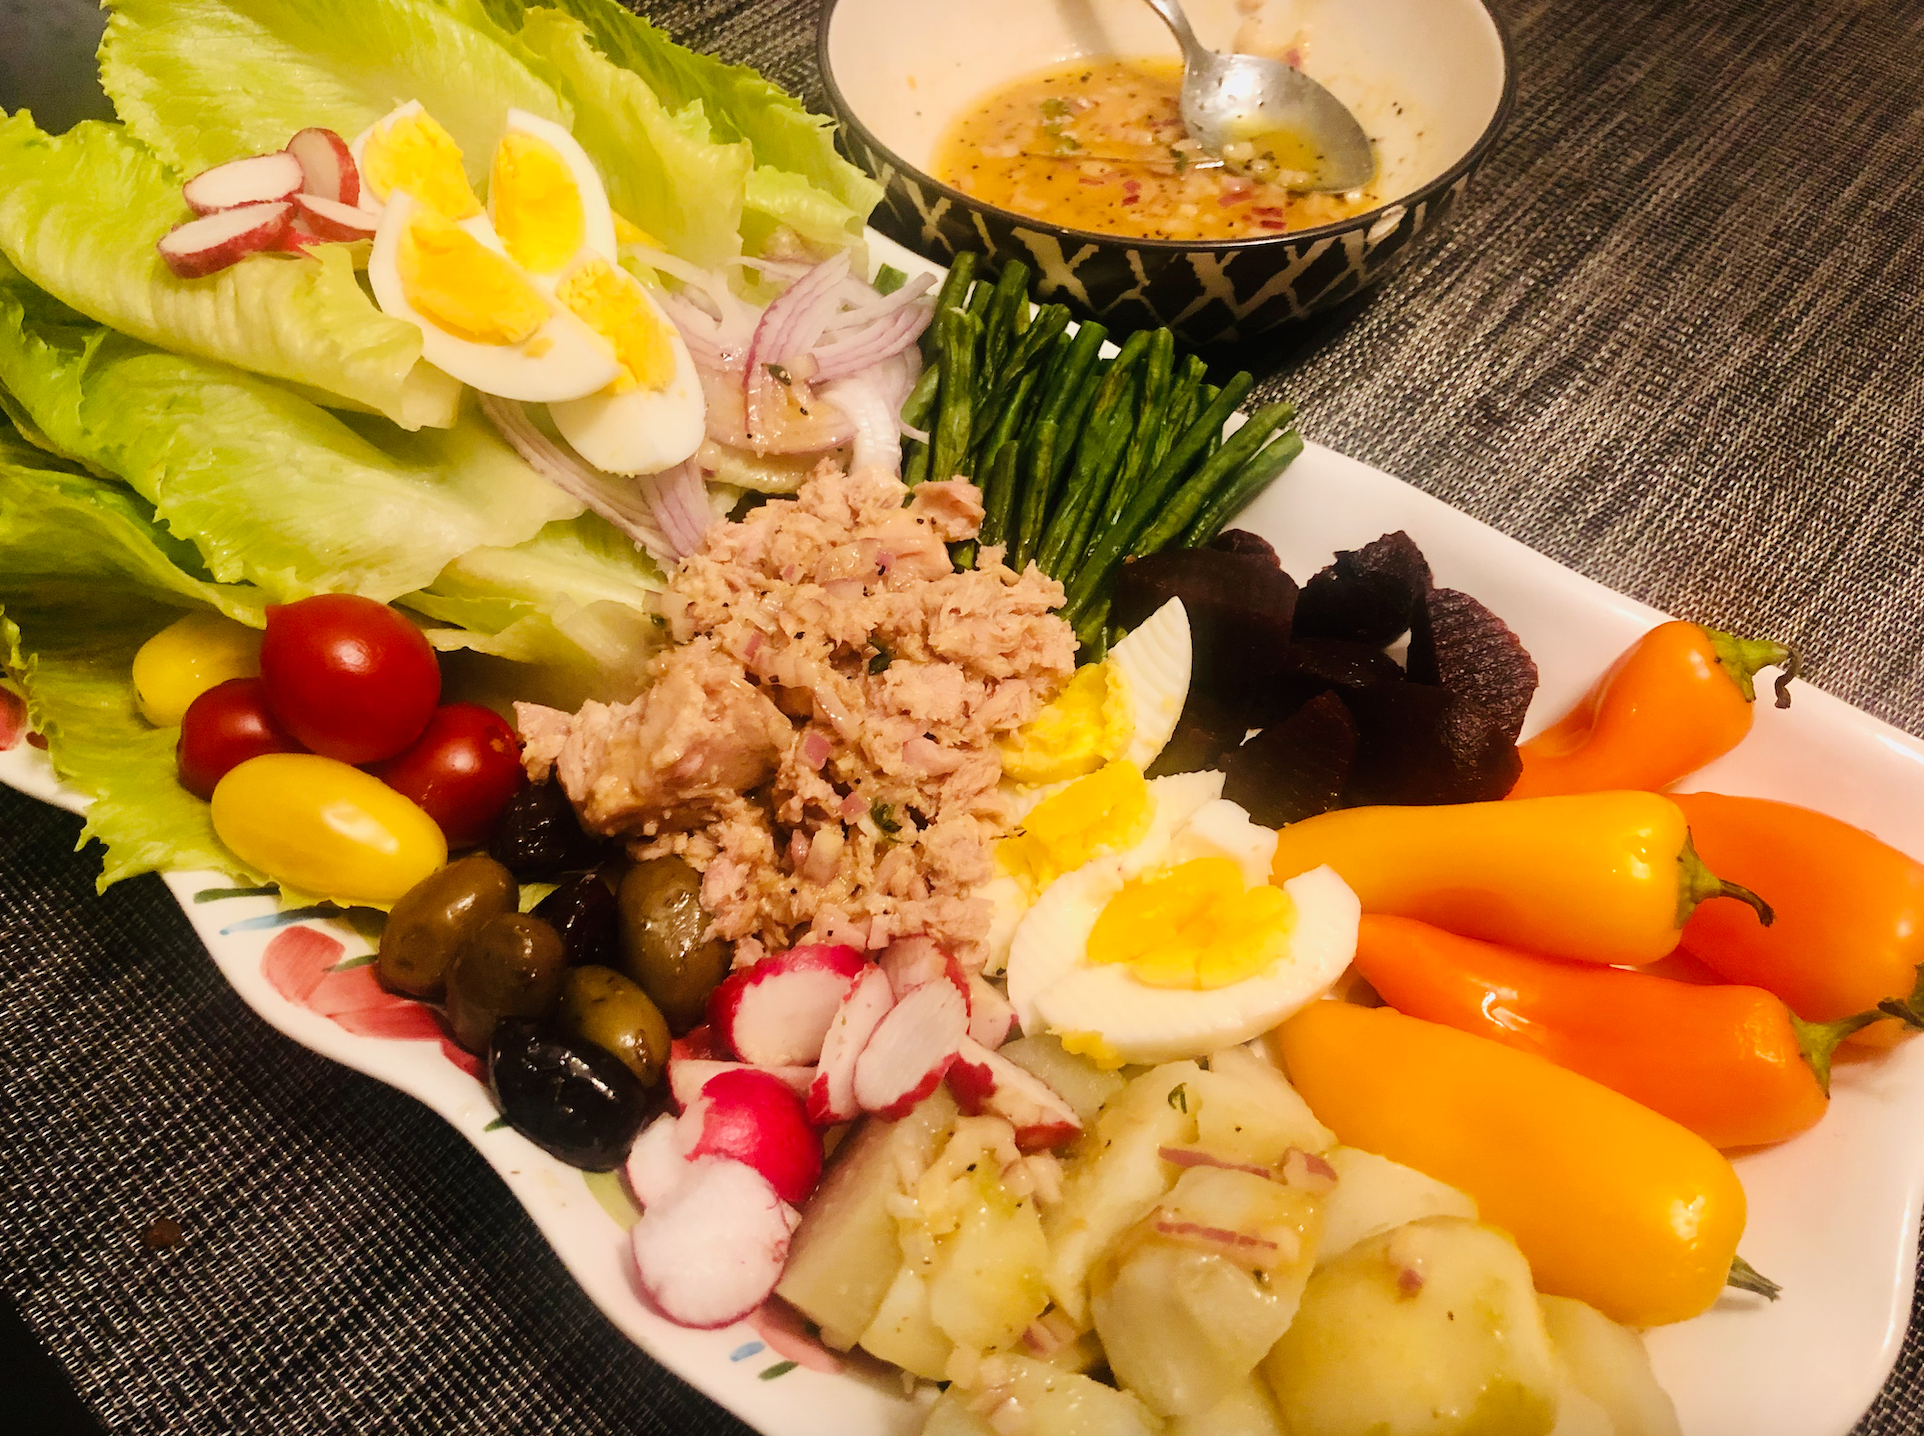 Let's make Salade Niçoise, the most famous French salad!